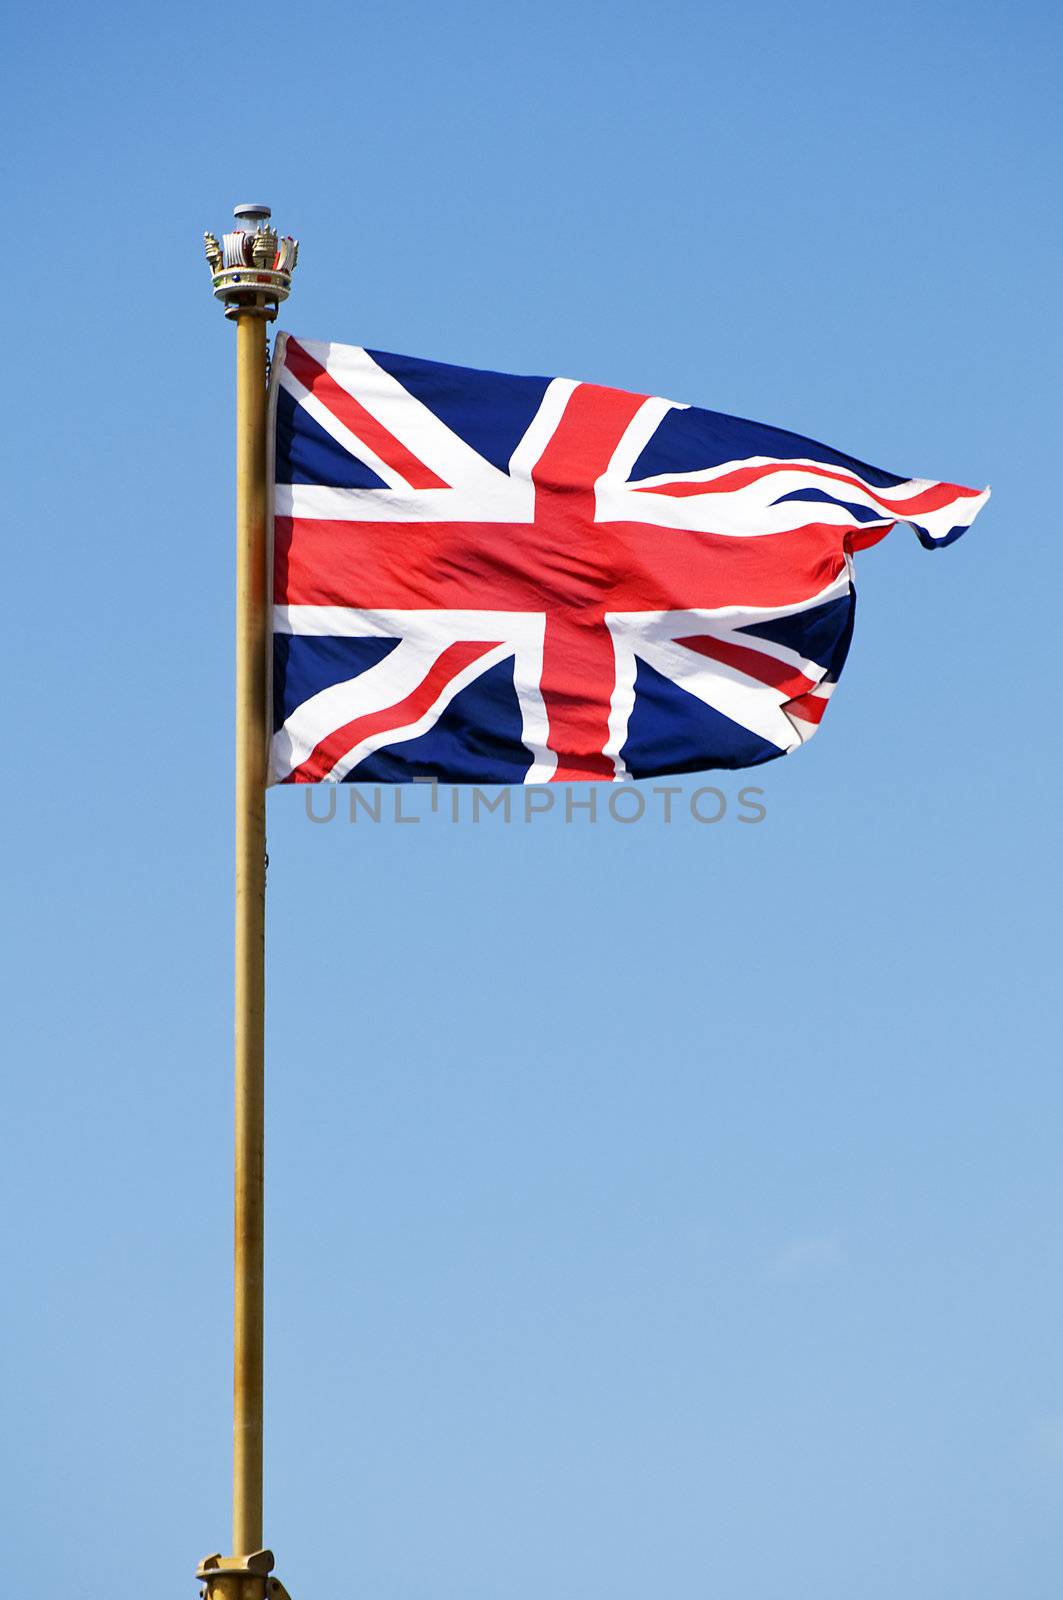 Great Britain flag blowing in the sky